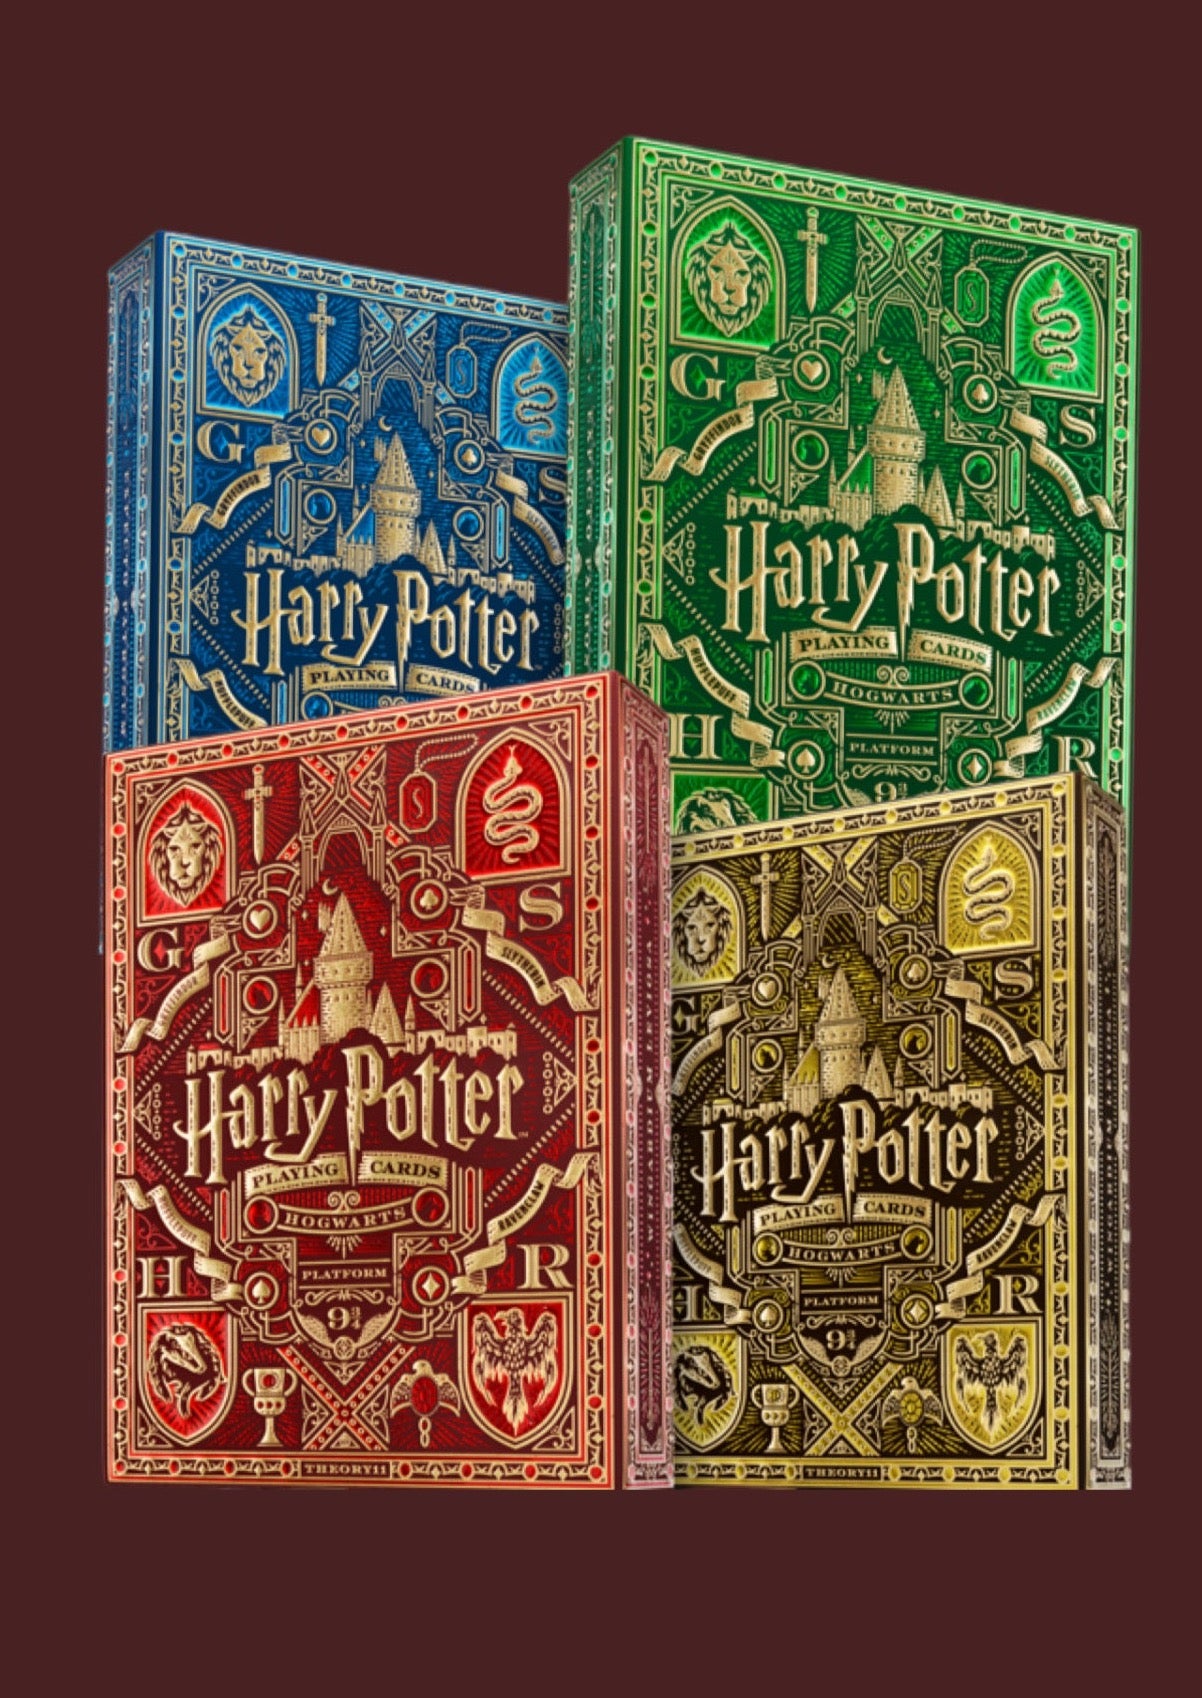 Harry Potter playing cards uspcc deck